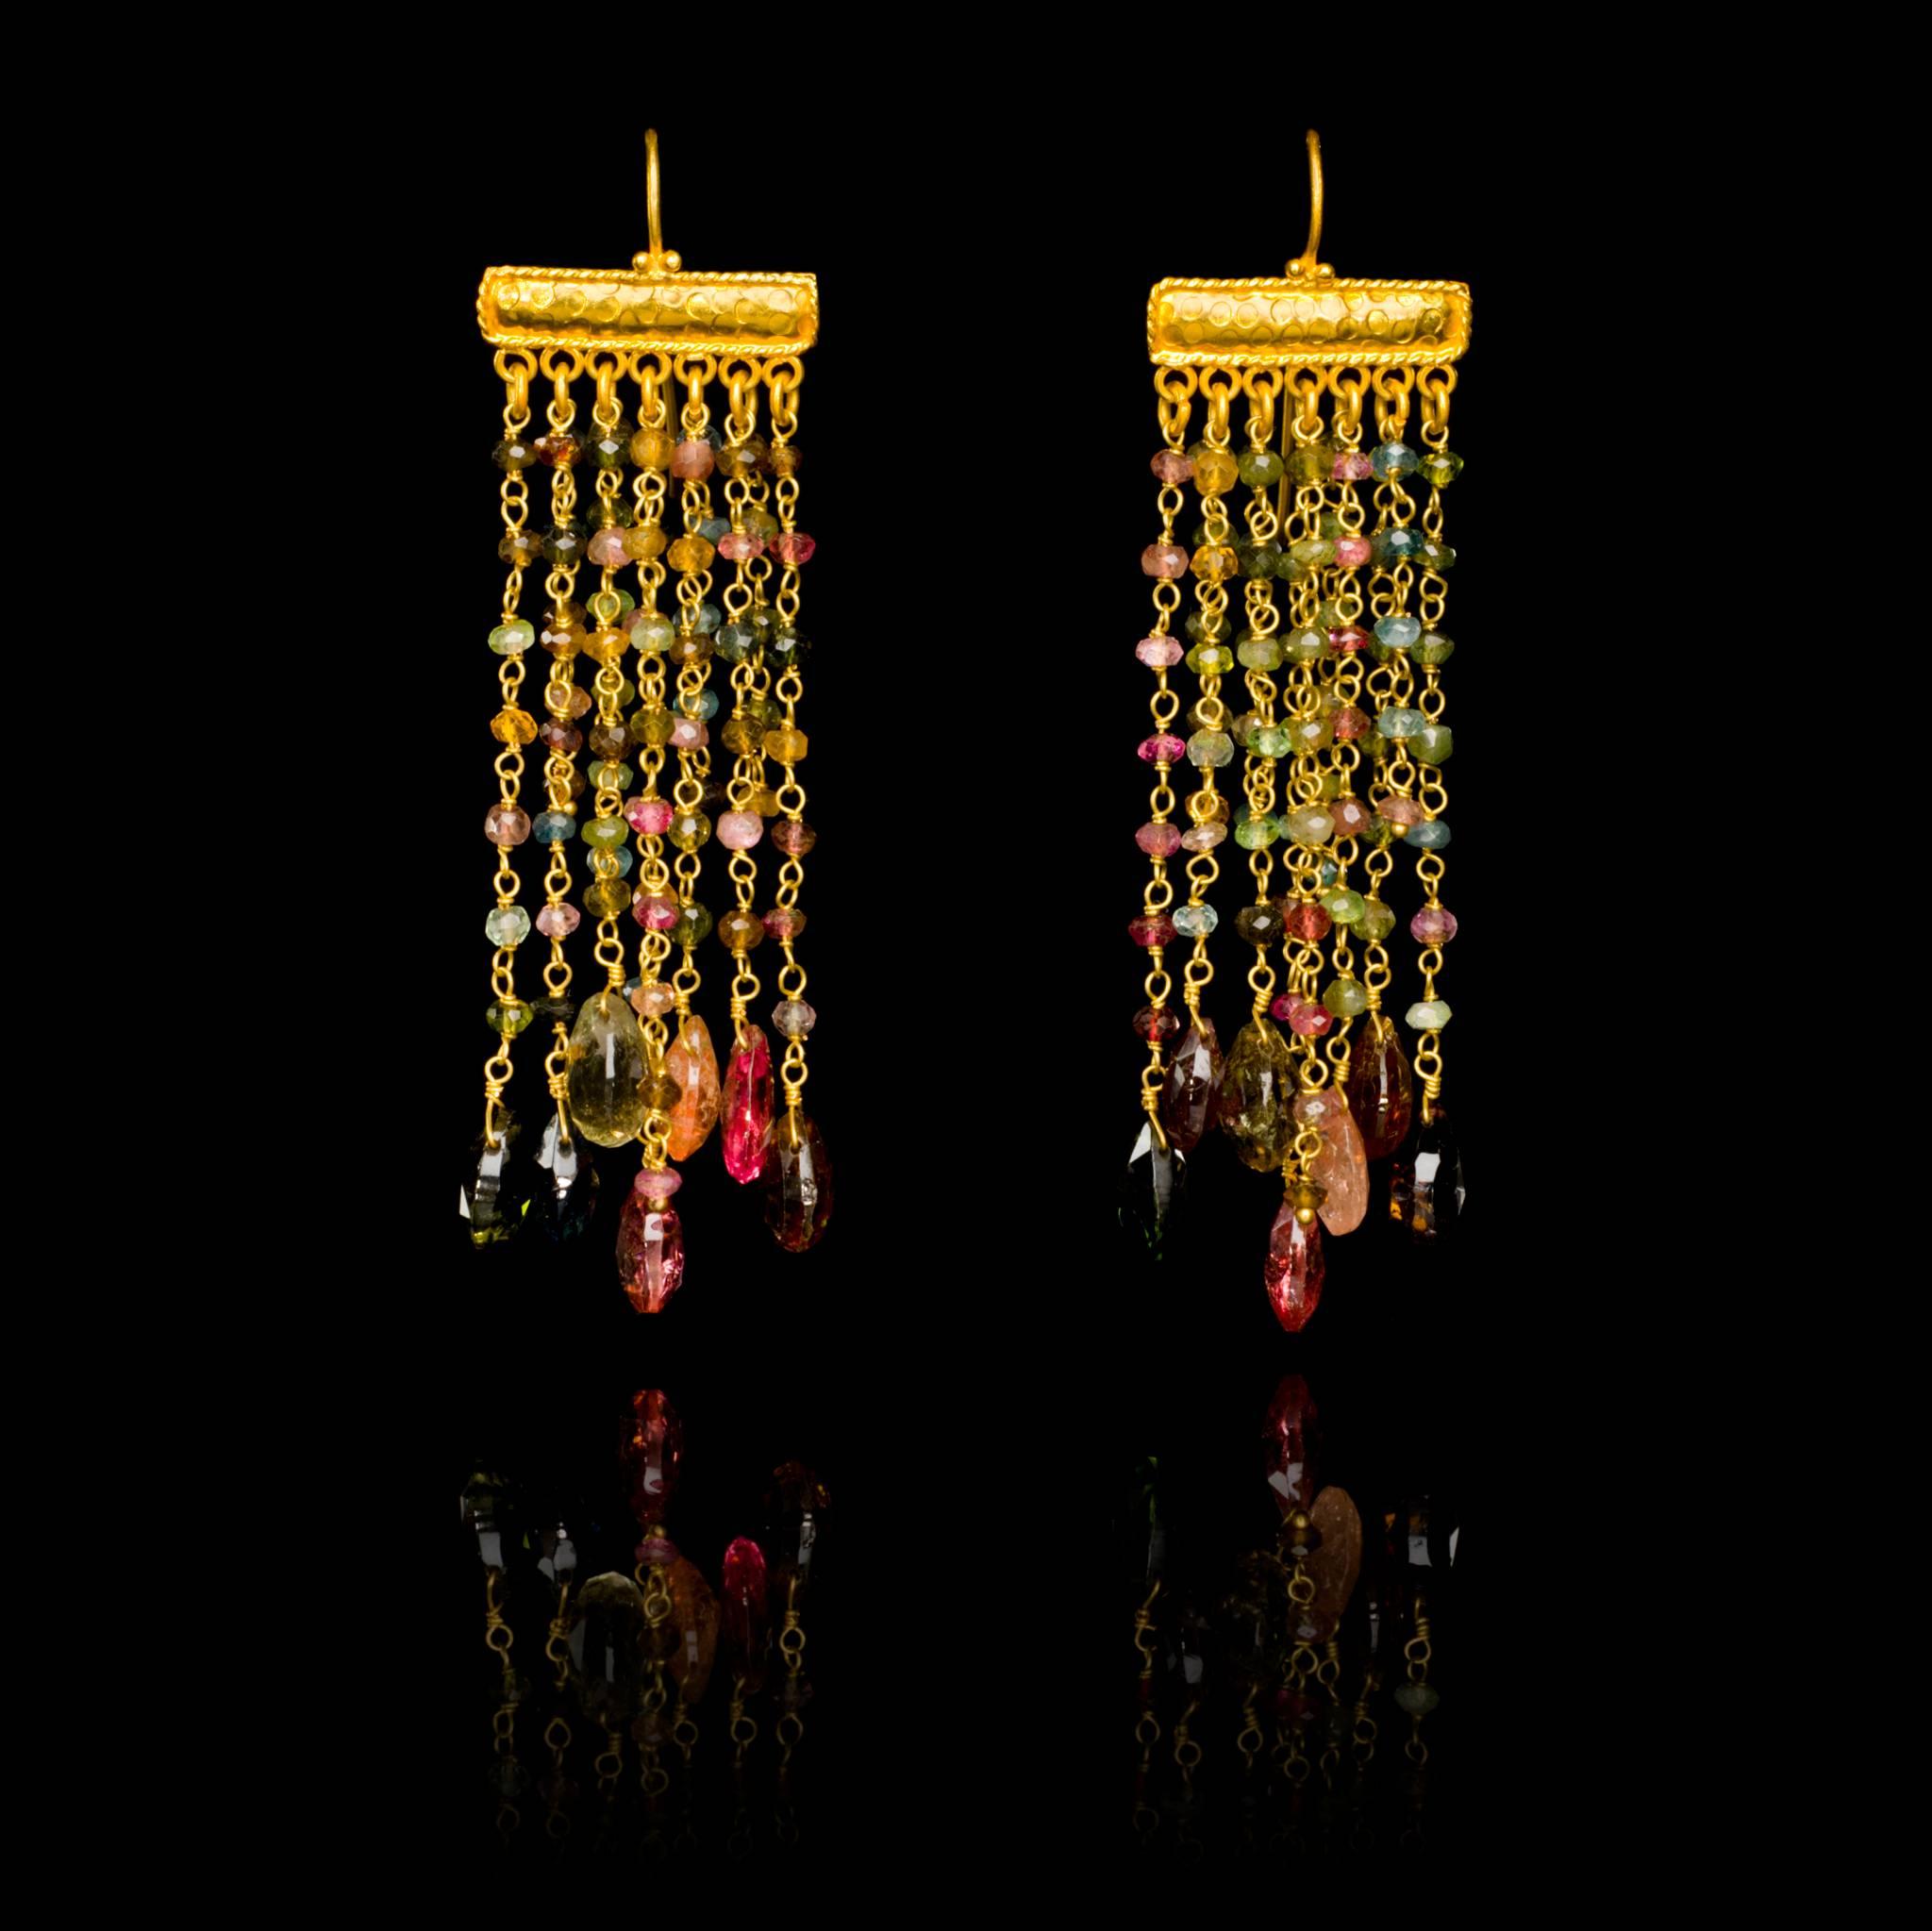 Hand embossed 18 karat gold chandelier earrings with tourmaline beads and briolettes. Due to the hand crafted nature of these jewels, slight asymmetry may occur. The earrings are 8cm, 3.13in long and 2cm, 0.75in wide. The weight of each earring is